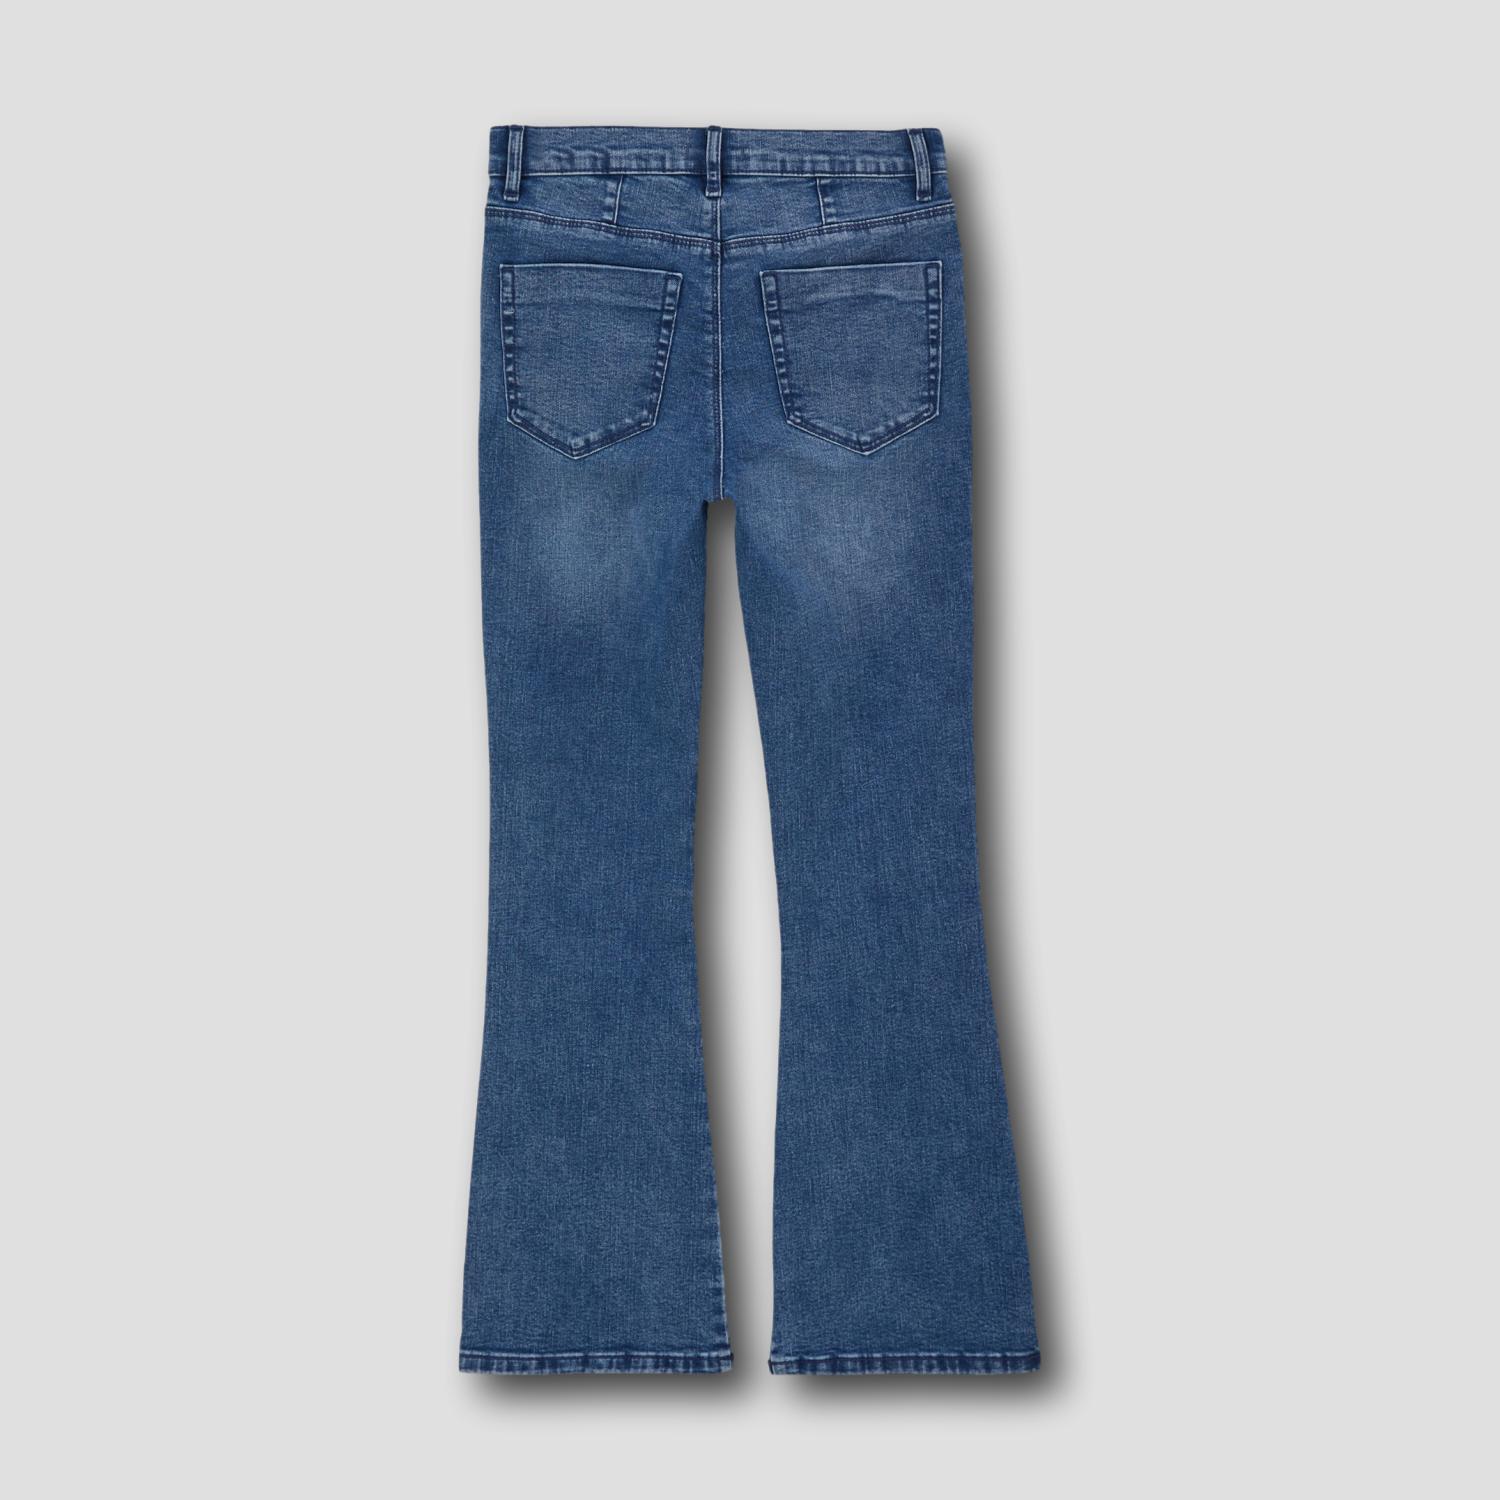 Flared Jeans für Kids im Relaxed Fit - Peppys